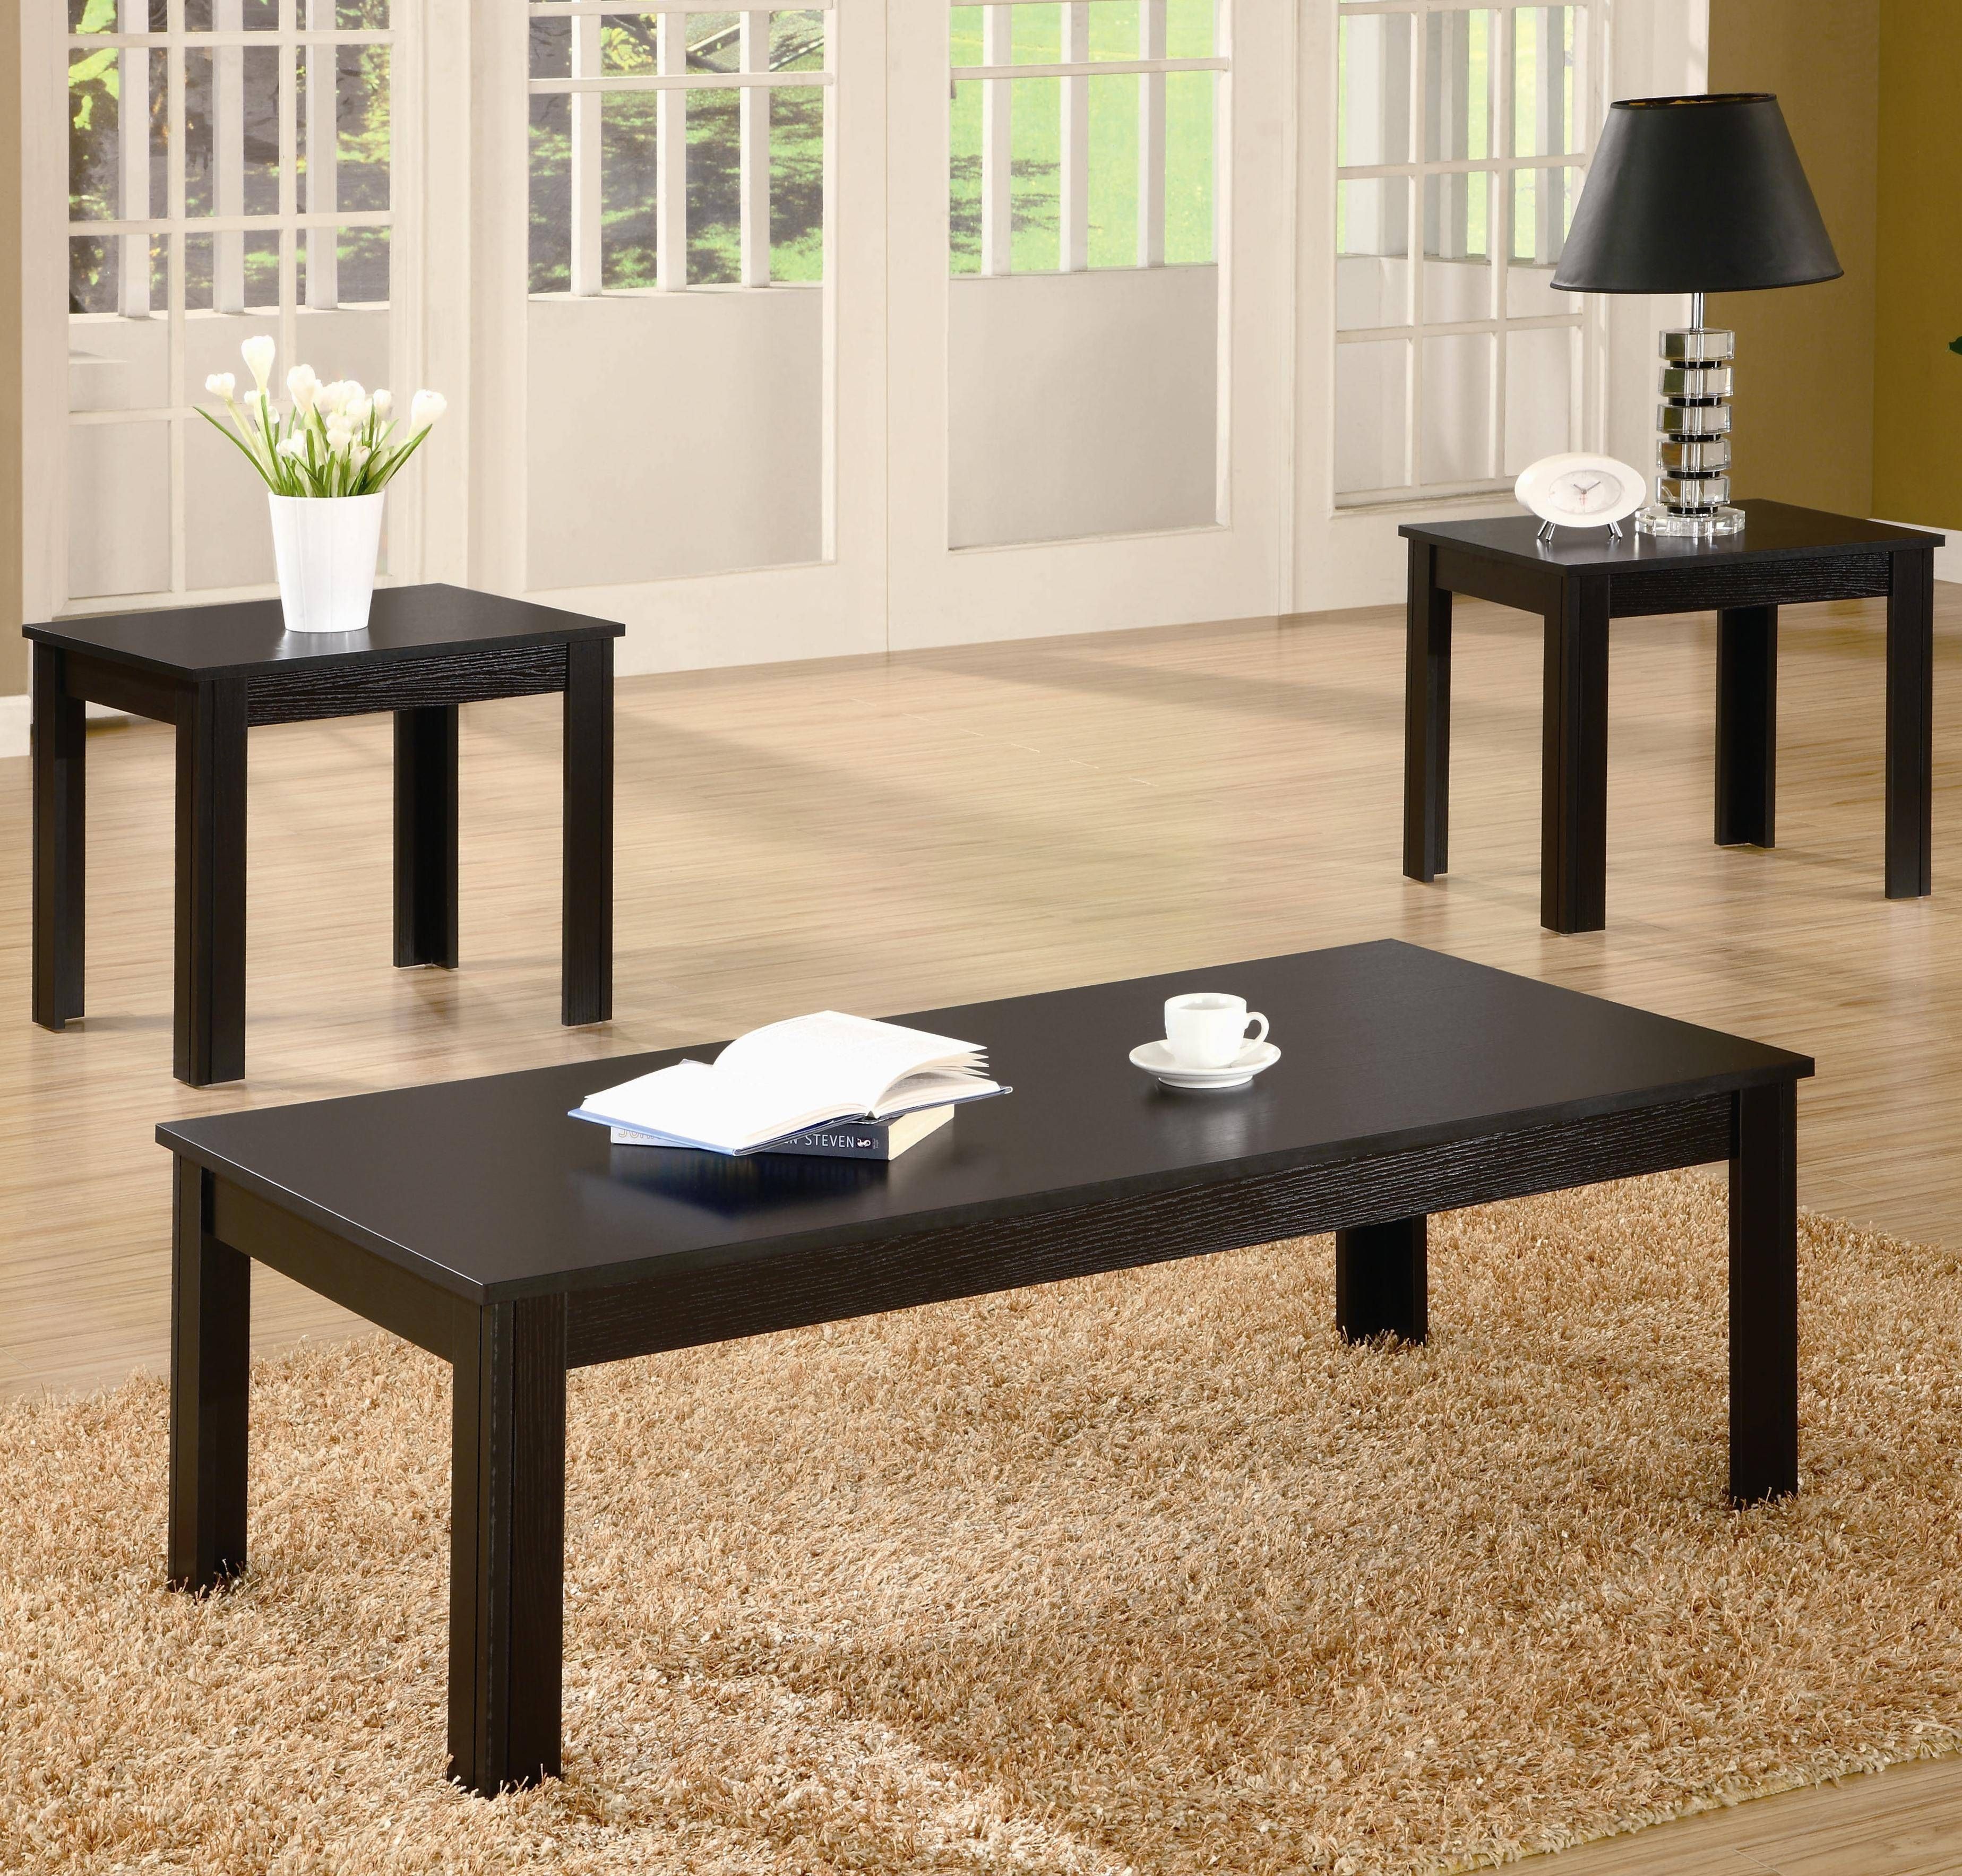 Black Coffee Table And End Table Sets | Coffee Tables Decoration Throughout Coffee Table With Matching End Tables (View 4 of 30)